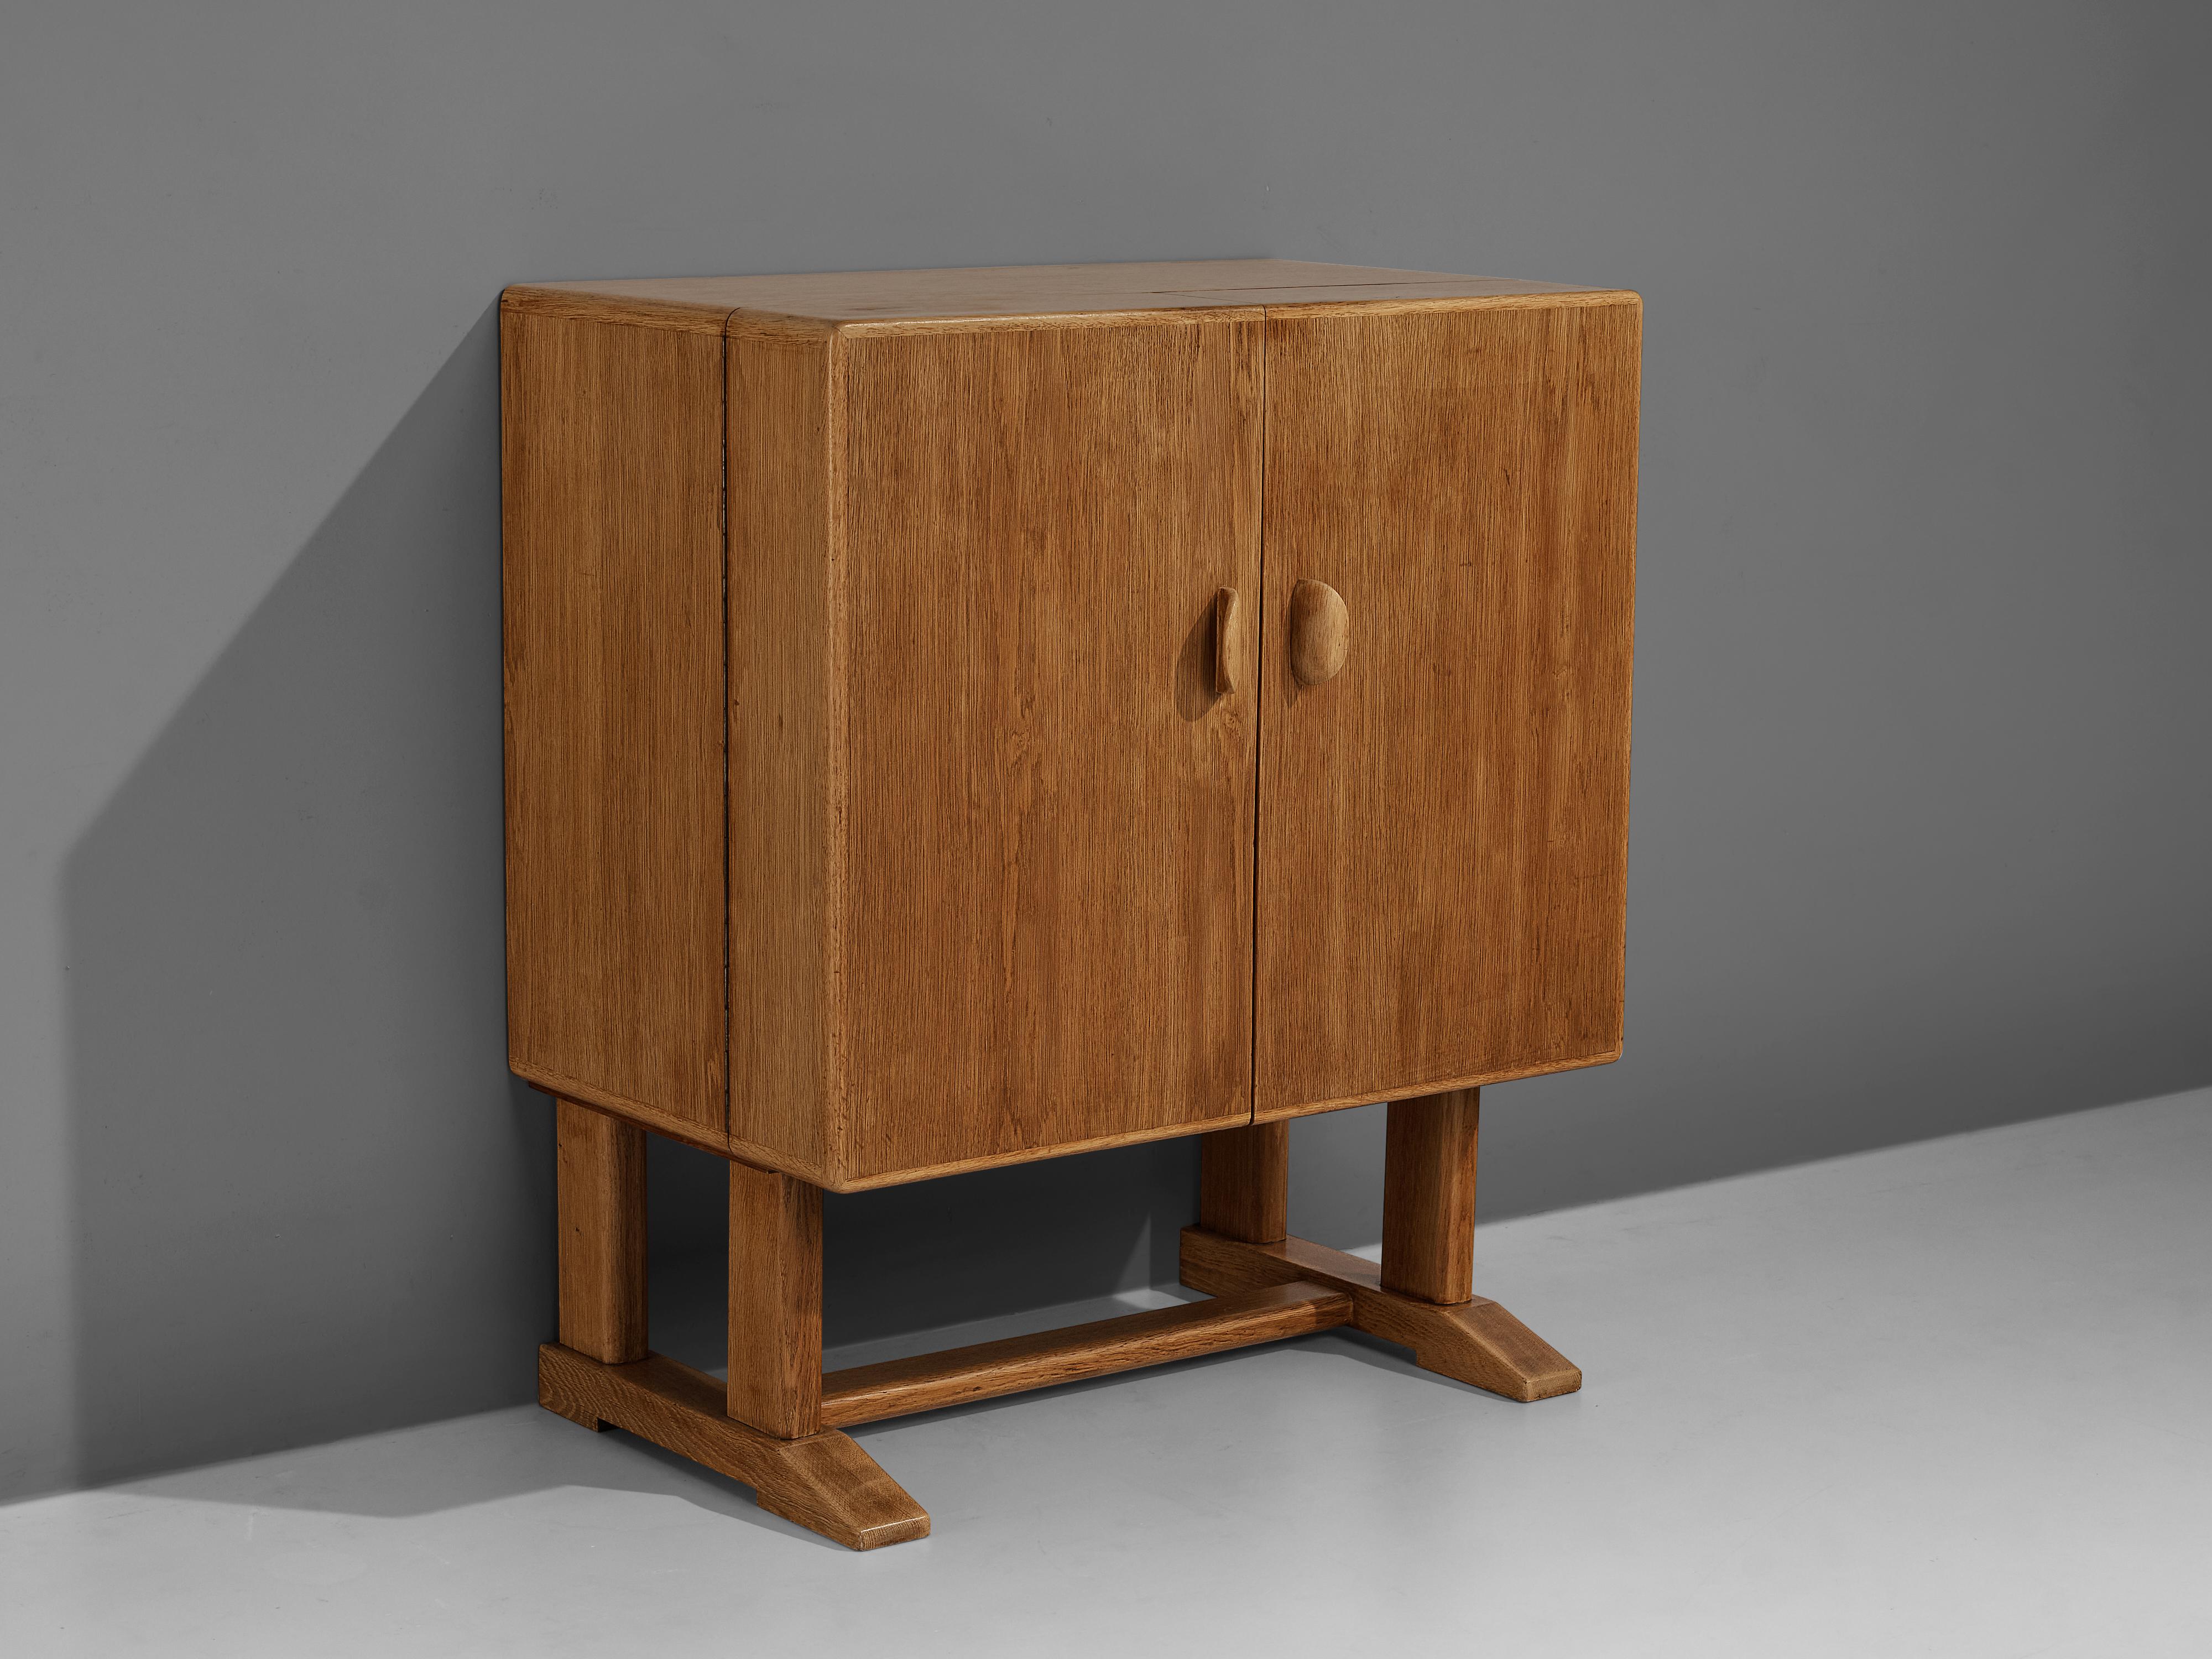 Bar cabinet, oak, glass, Denmark, 1960s

Sturdy Danish bar cabinet in solid oak. The cubic cabinet rests on two paired legs with an interconnective slat. Two decorative, carved handles access the inside. Multiple functional storage facilities are